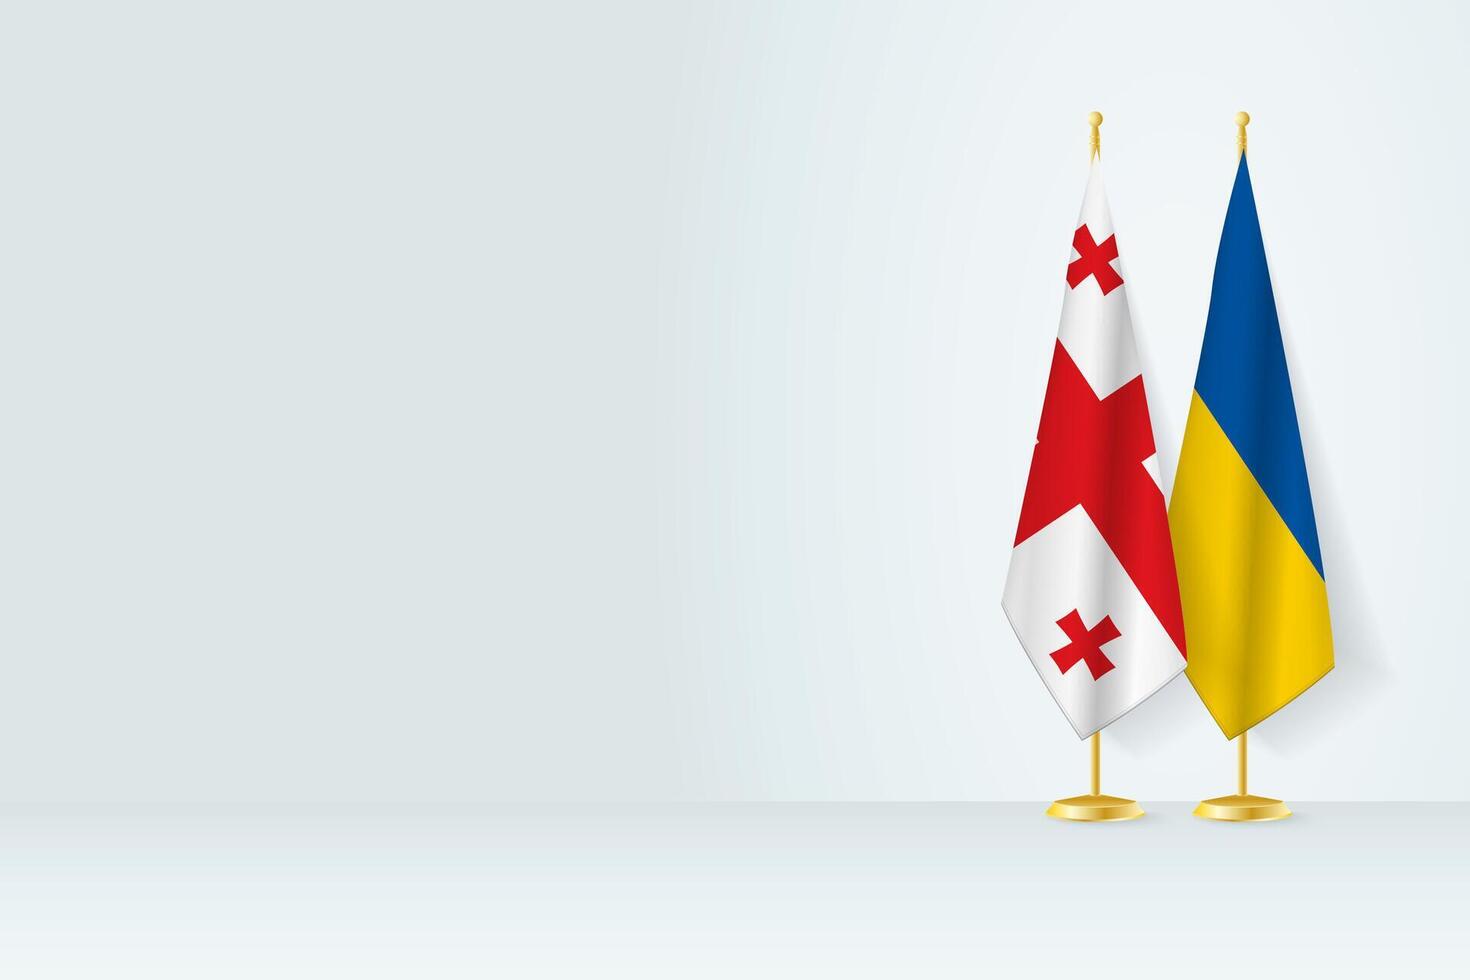 Flags of Georgia and Ukraine on flag stand, meeting between two countries. vector